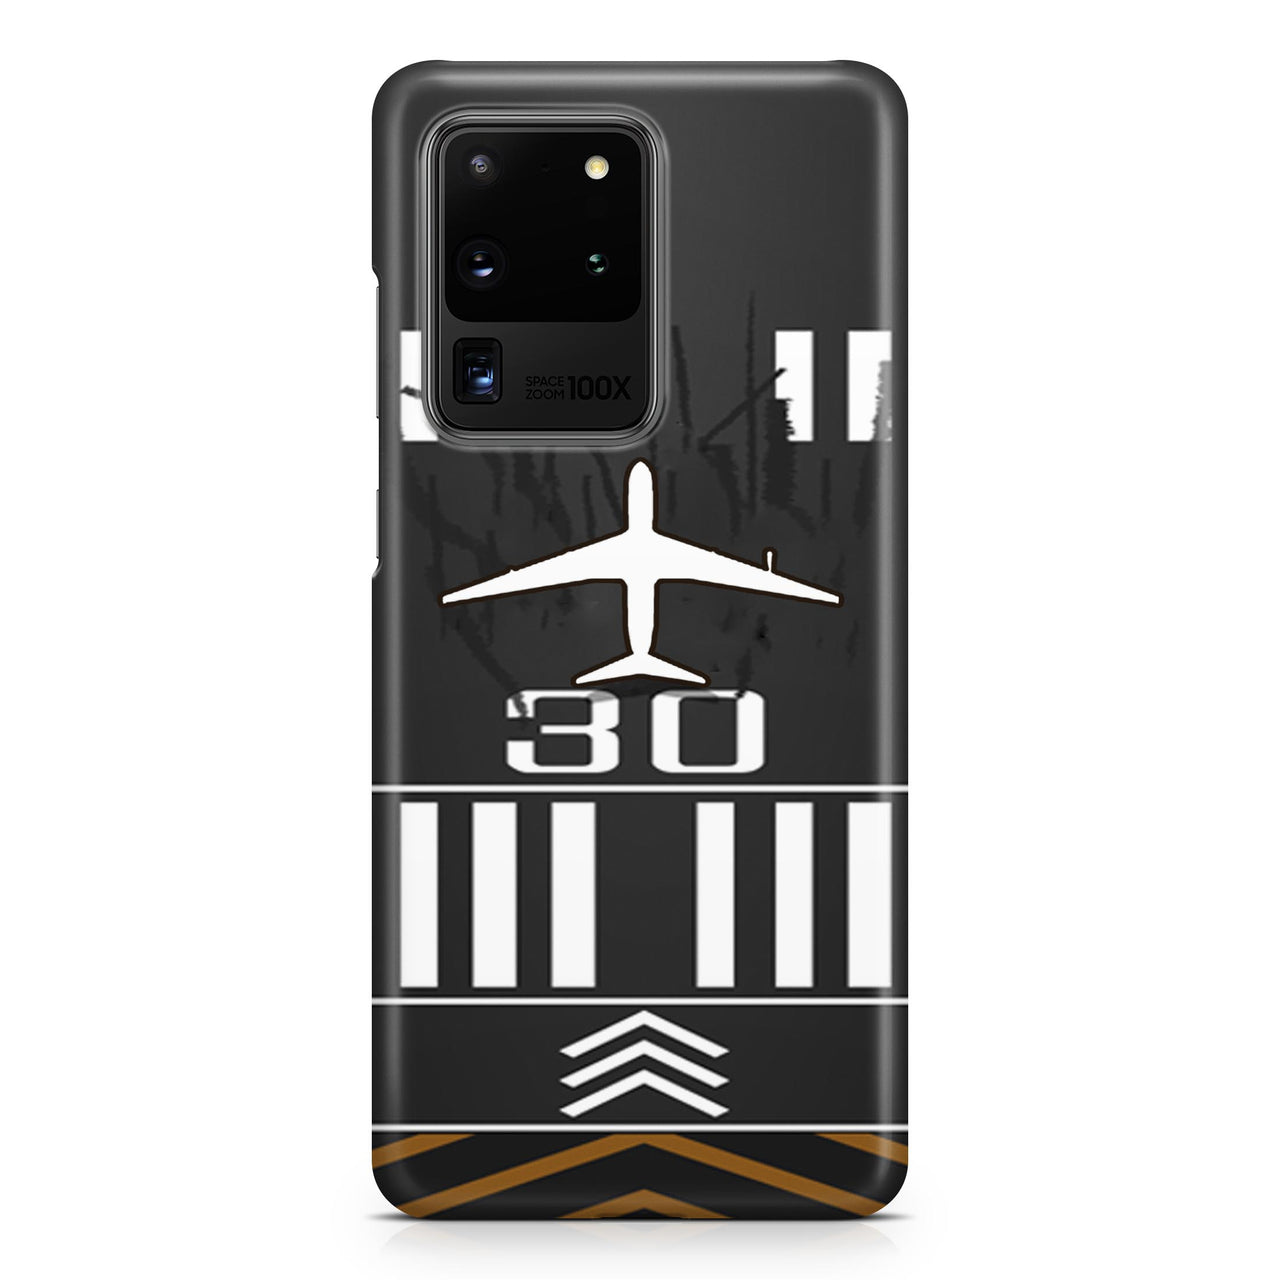 Customizable Runway Designed Samsung S & Note Cases